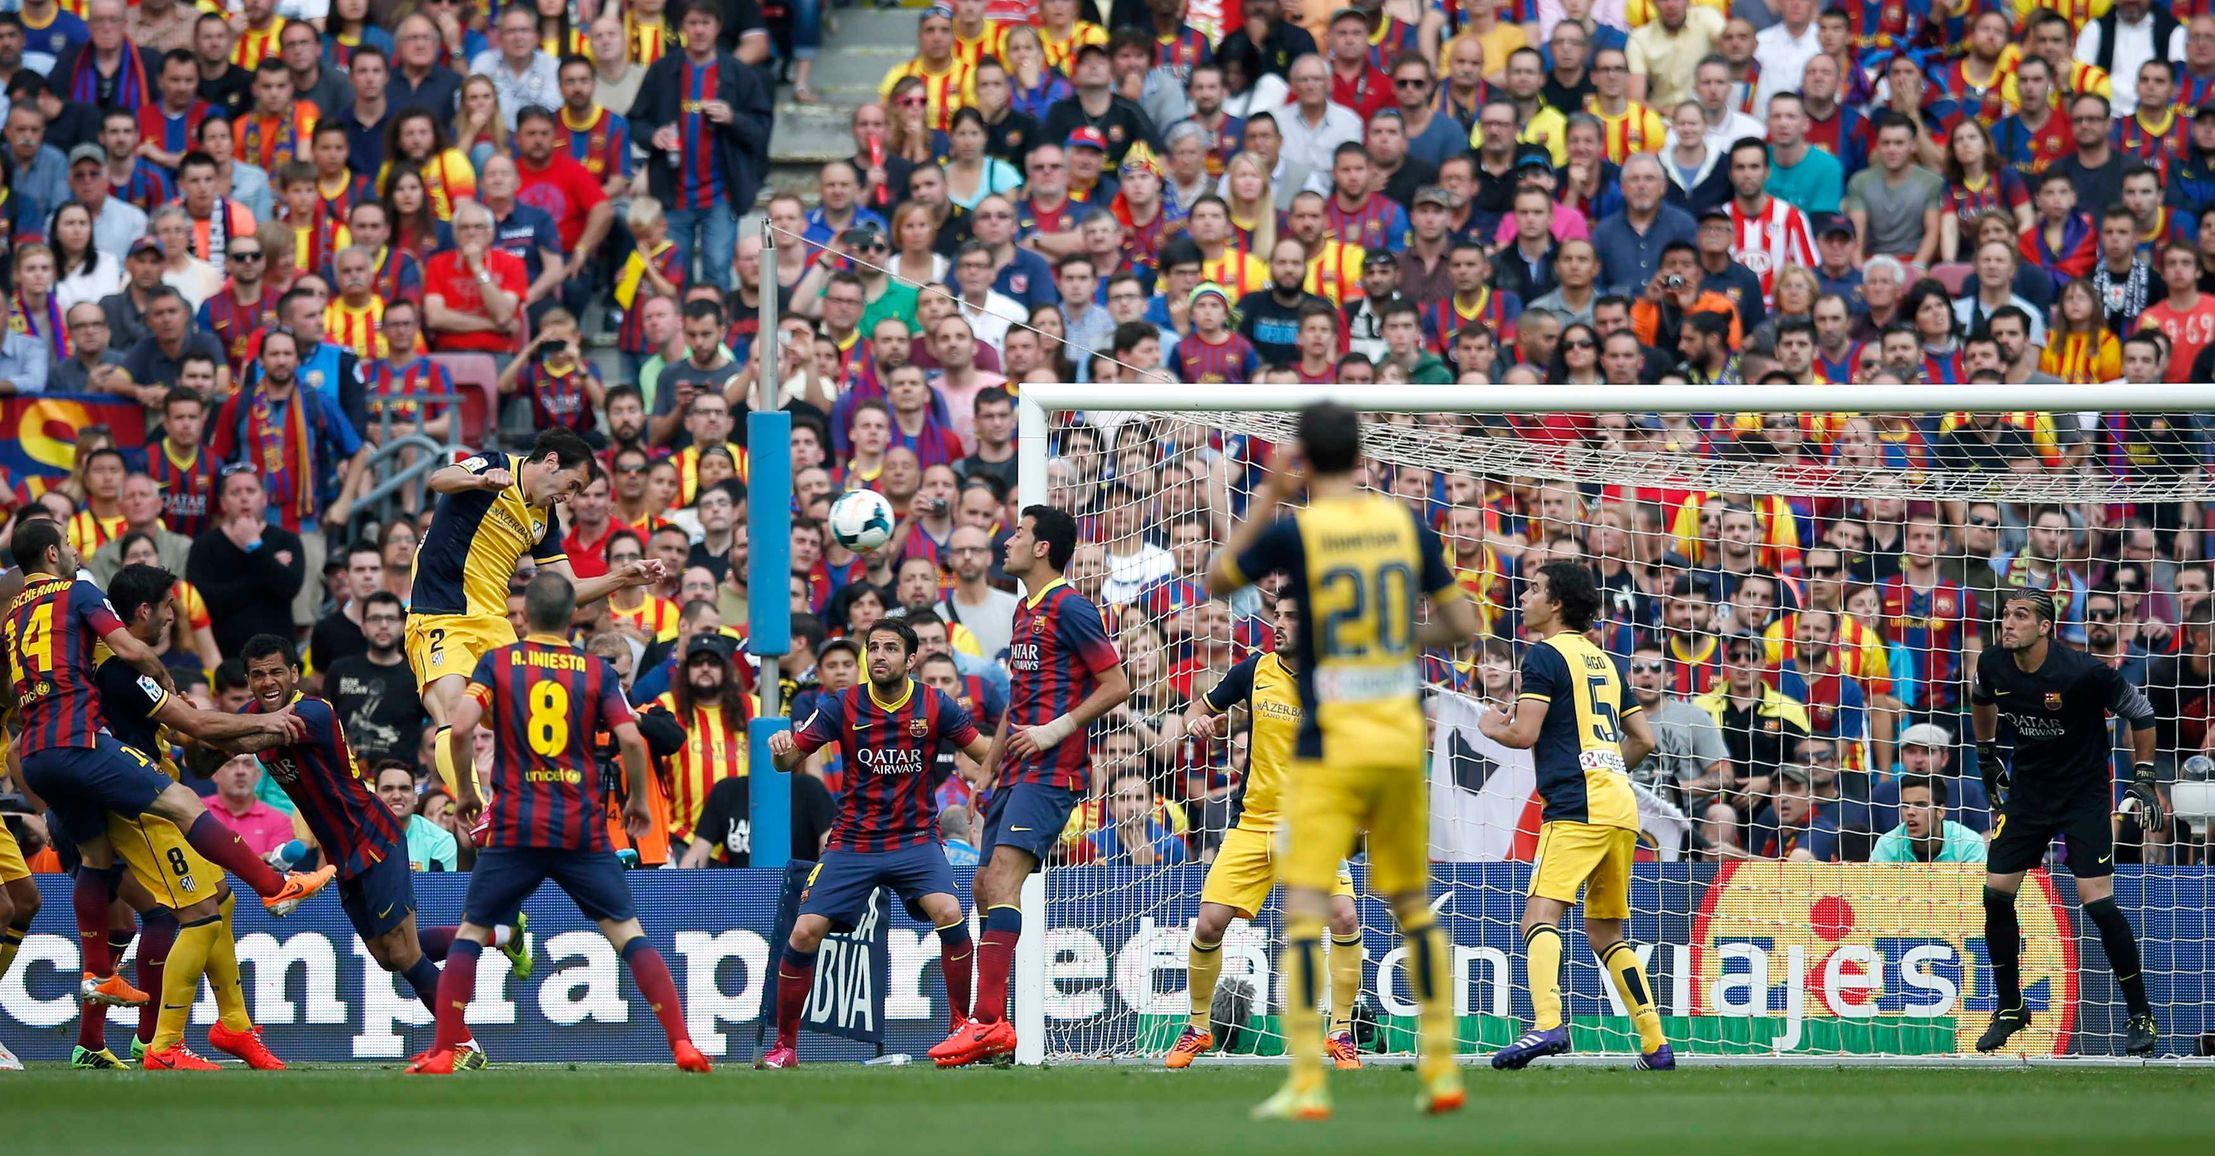 Atletico Madrid's Godin heads the ball to score against Barcelona during their Spanish first division soccer match in Barcelona